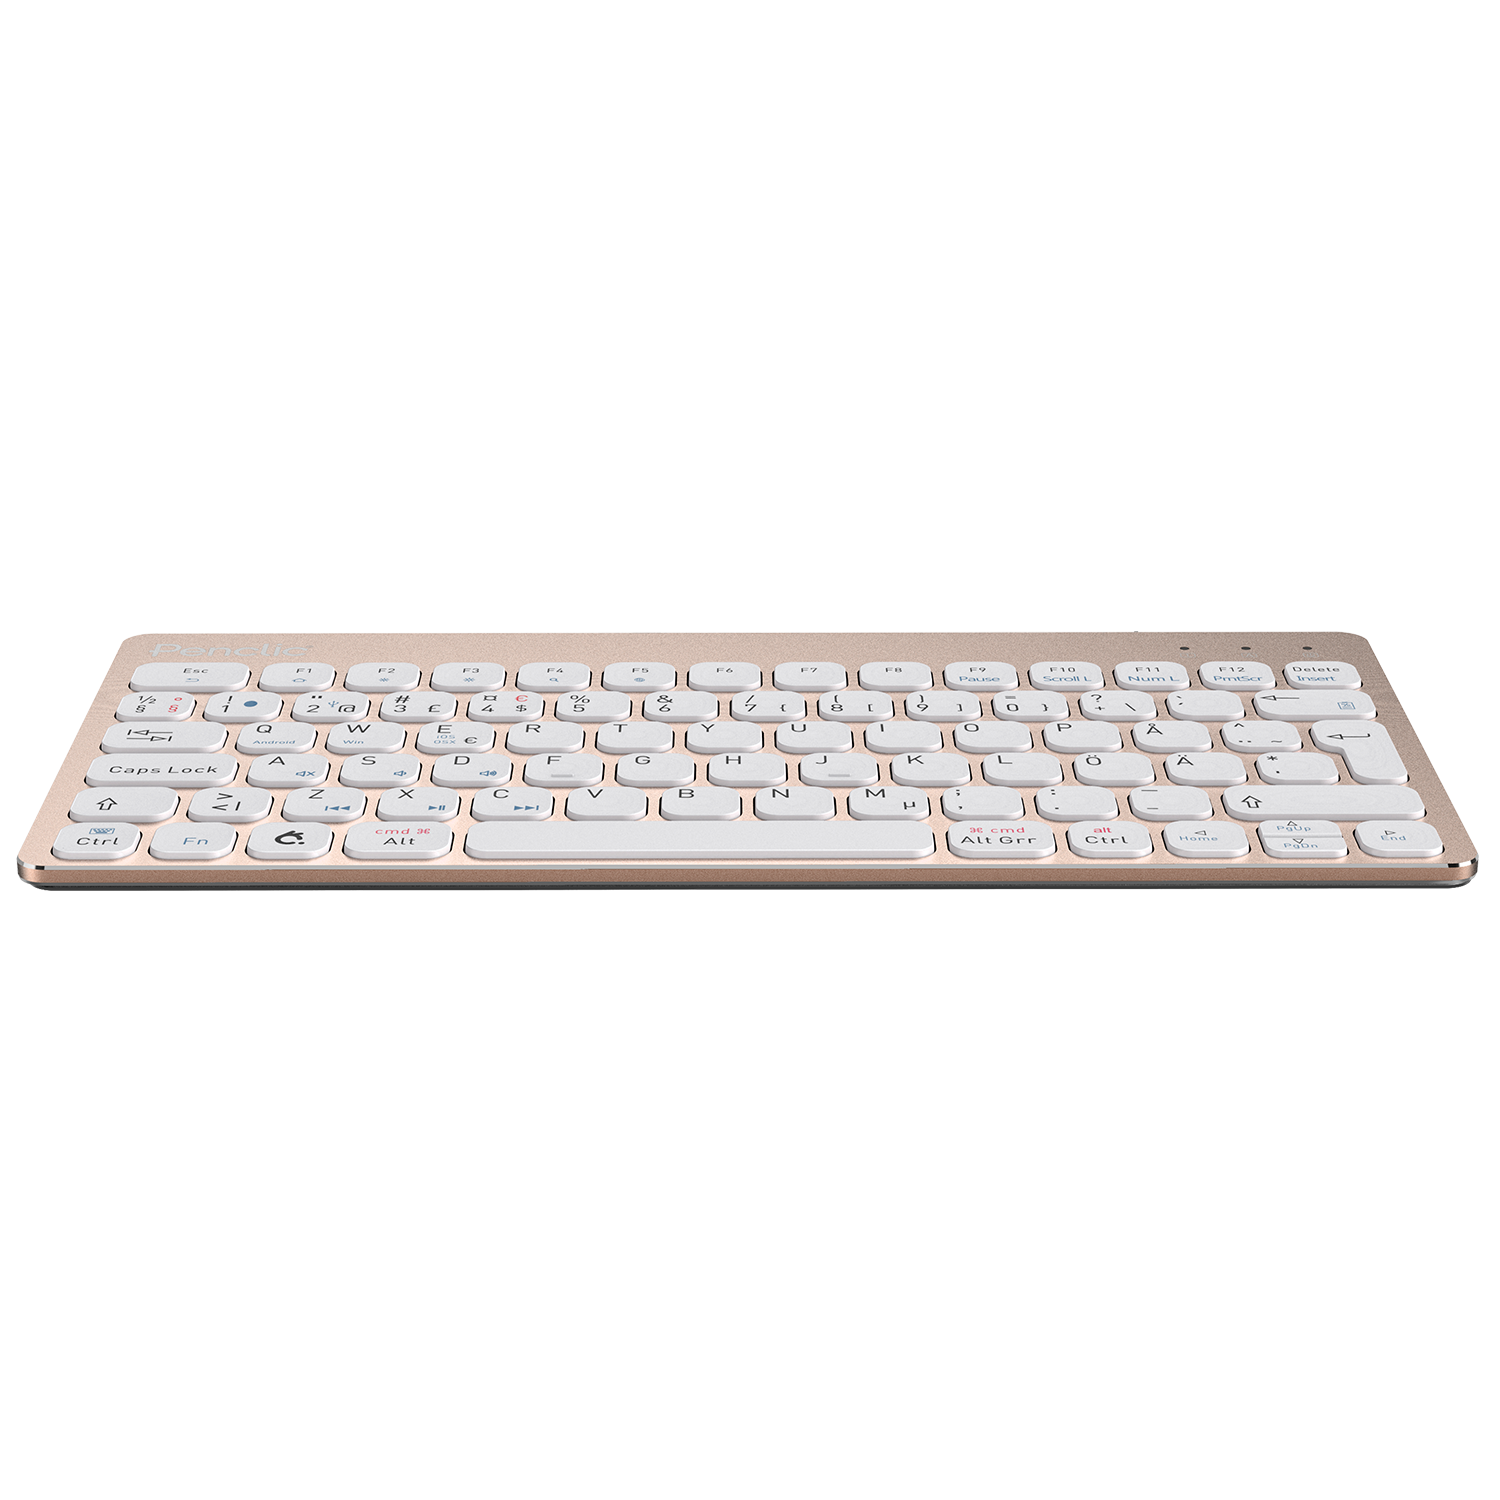 Wireless Keyboard You've Been Waiting For - KB3 by Penclic